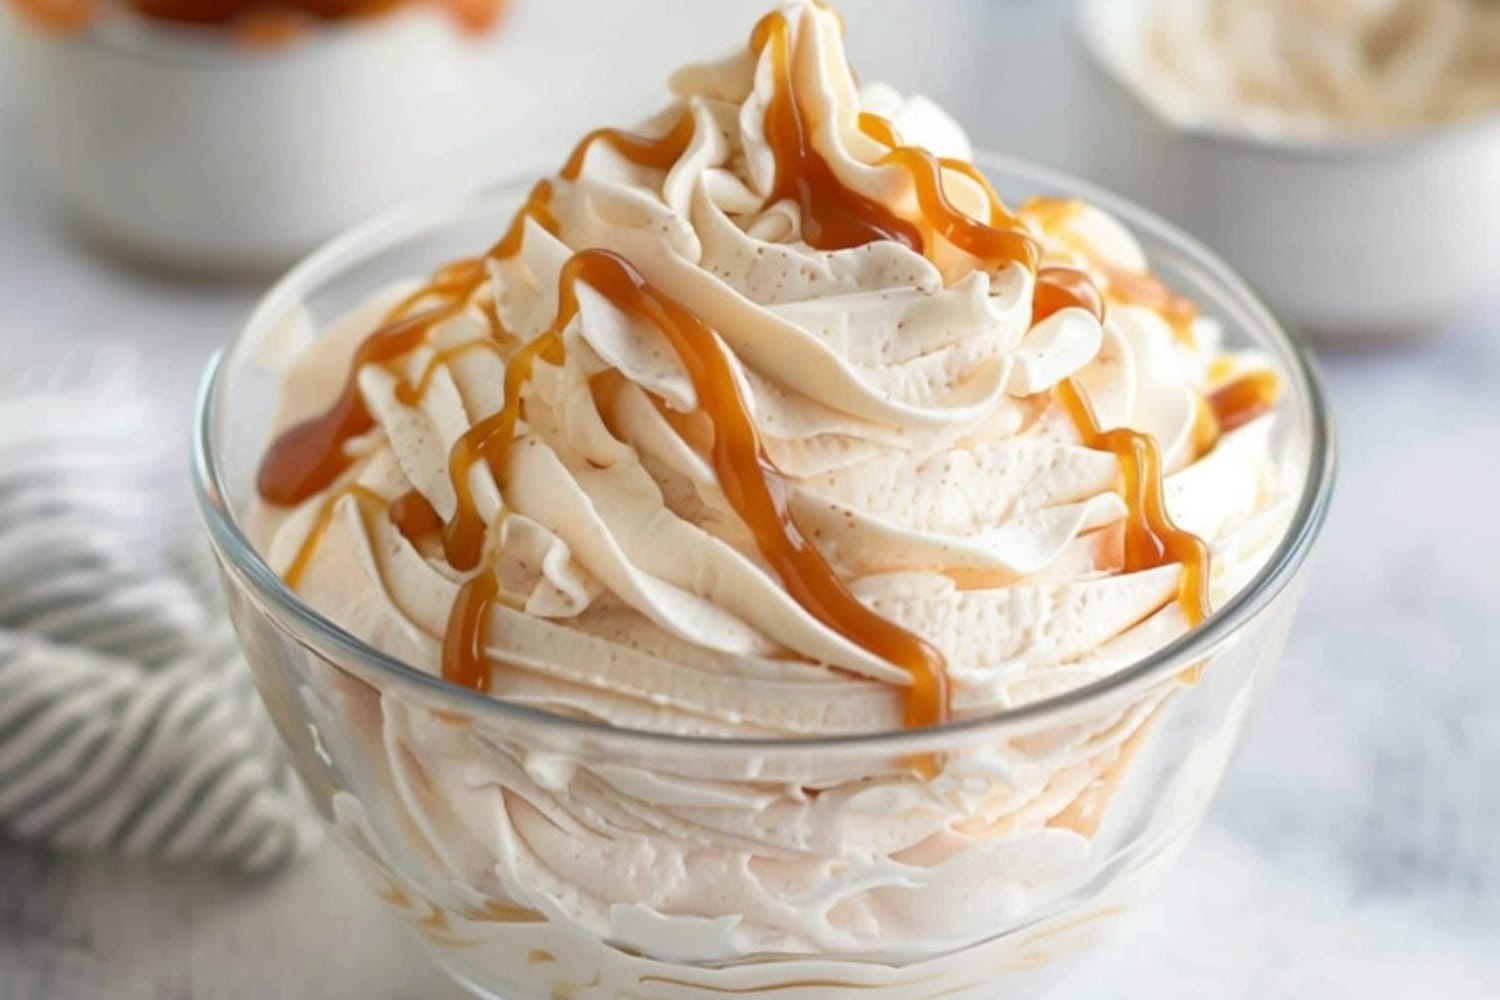 Salted caramel whipped cream drizzled with caramel syrup on a glass bowl.